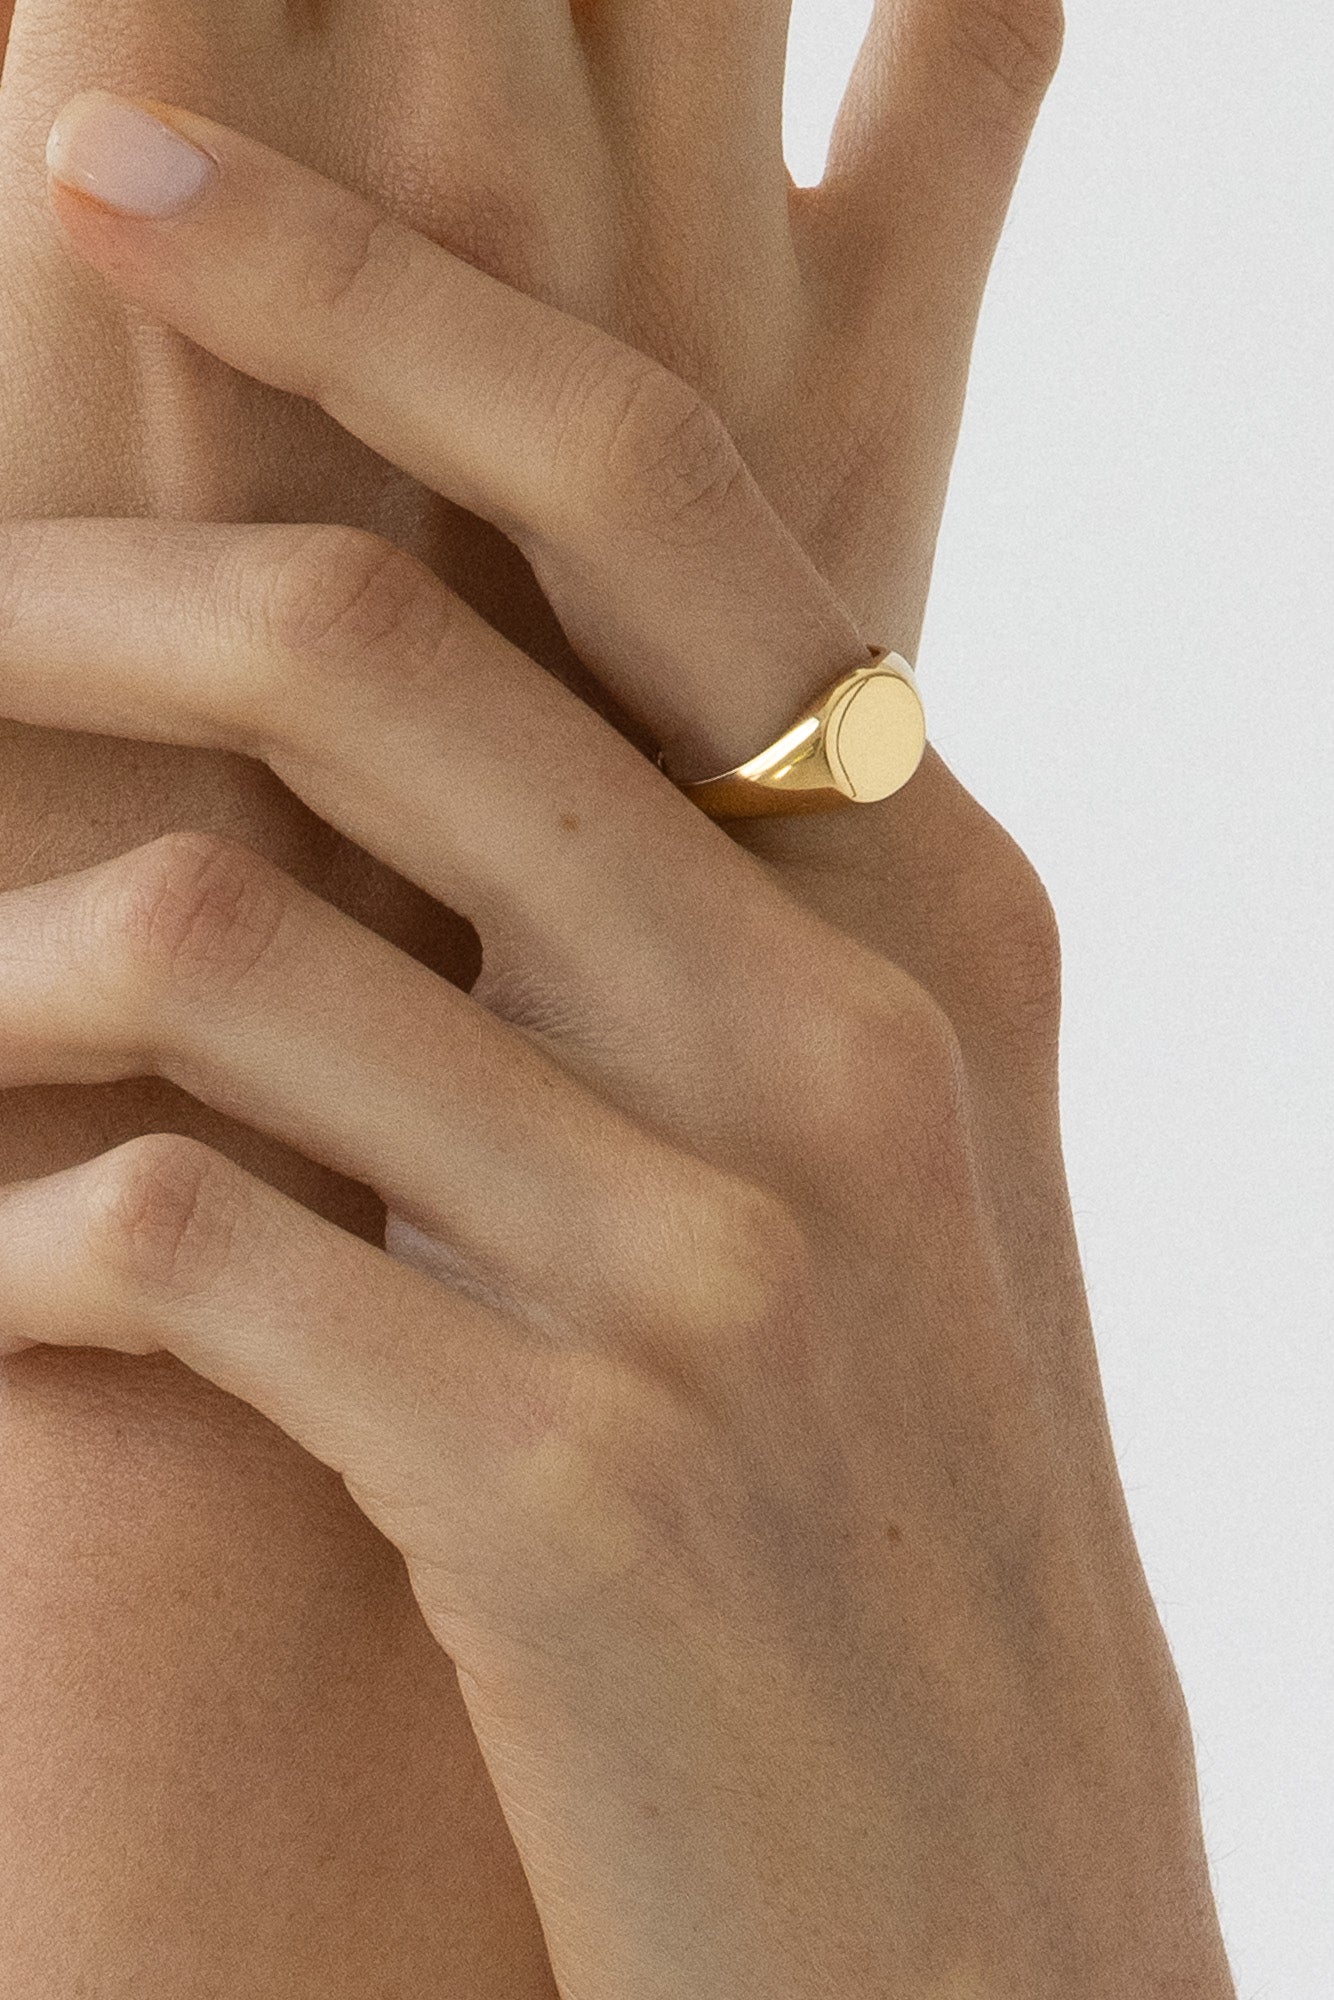 Flash Jewellery Classic Signet Ring in 9K Gold on models hand